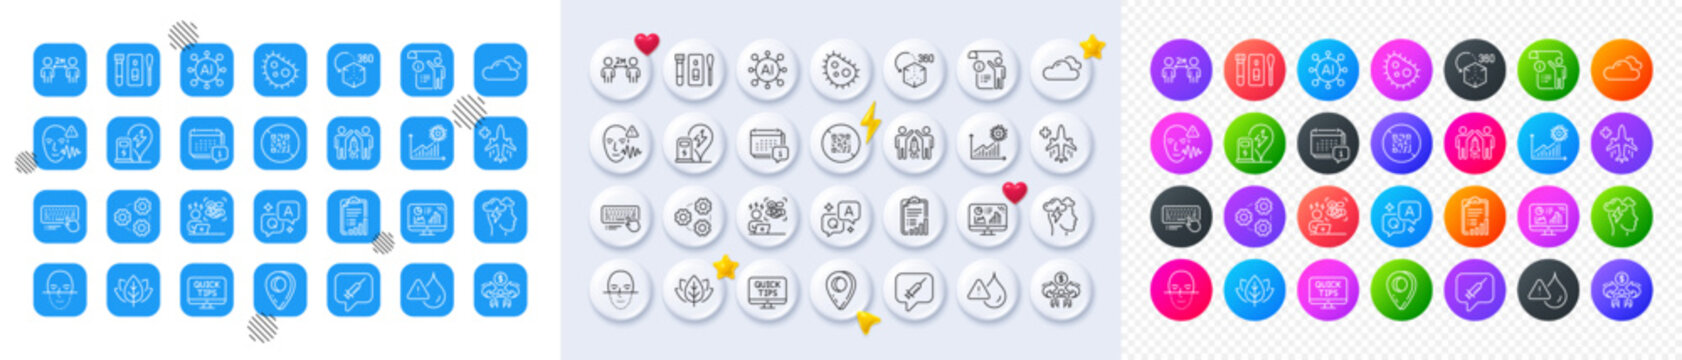 Waterproof, Gears and Cloudy weather line icons. Square, Gradient, Pin 3d buttons. AI, QA and map pin icons. Pack of Partnership, Analytics graph, Organic tested icon. Vector